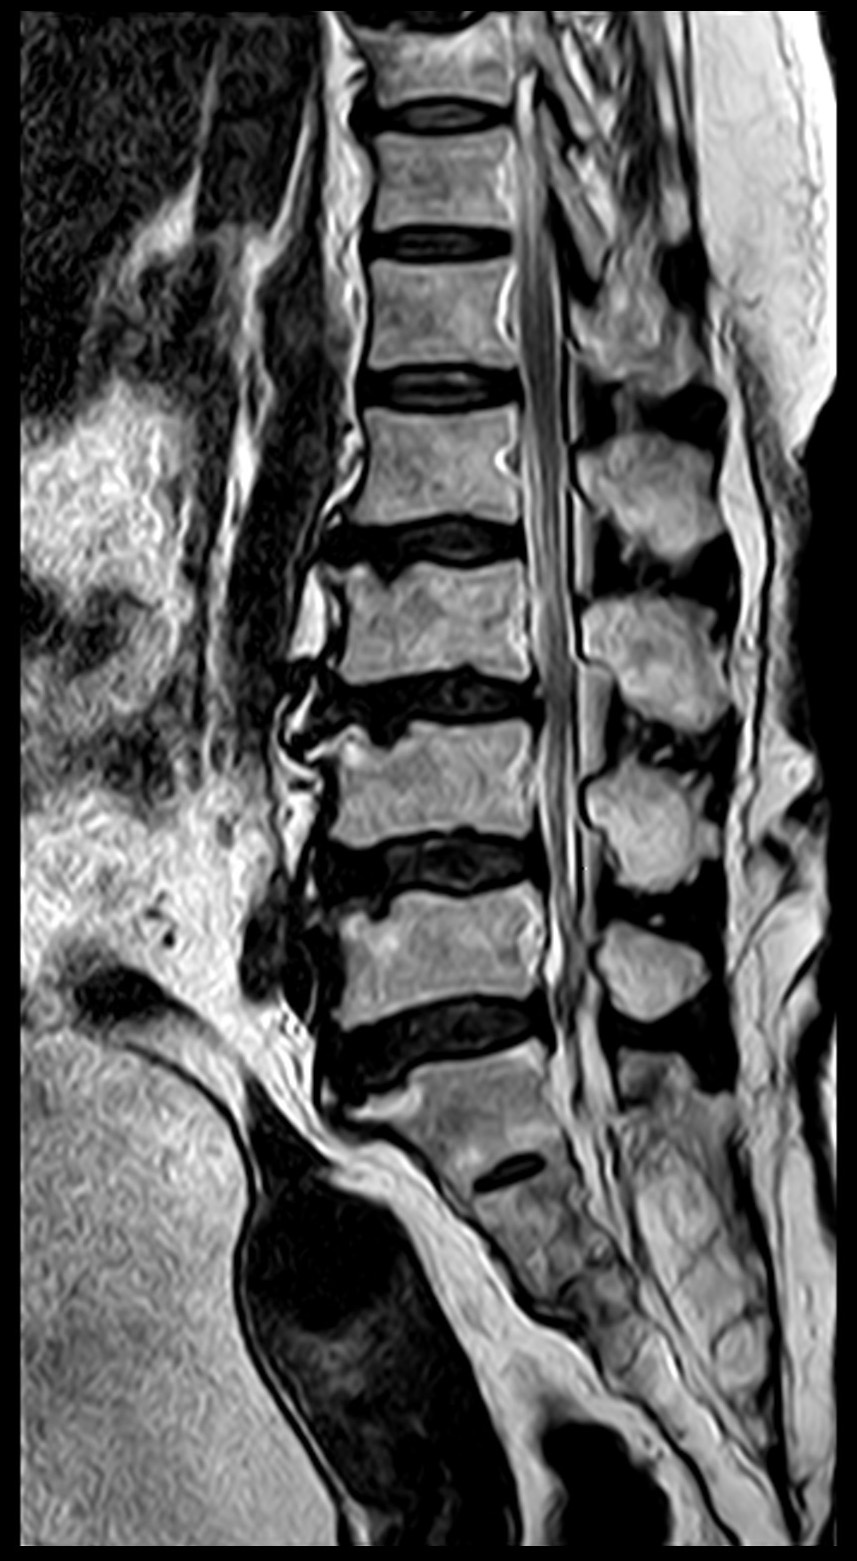 MY E-RADIOLOGY CASES: CASE 2: 72 year-old woman with severe back pain